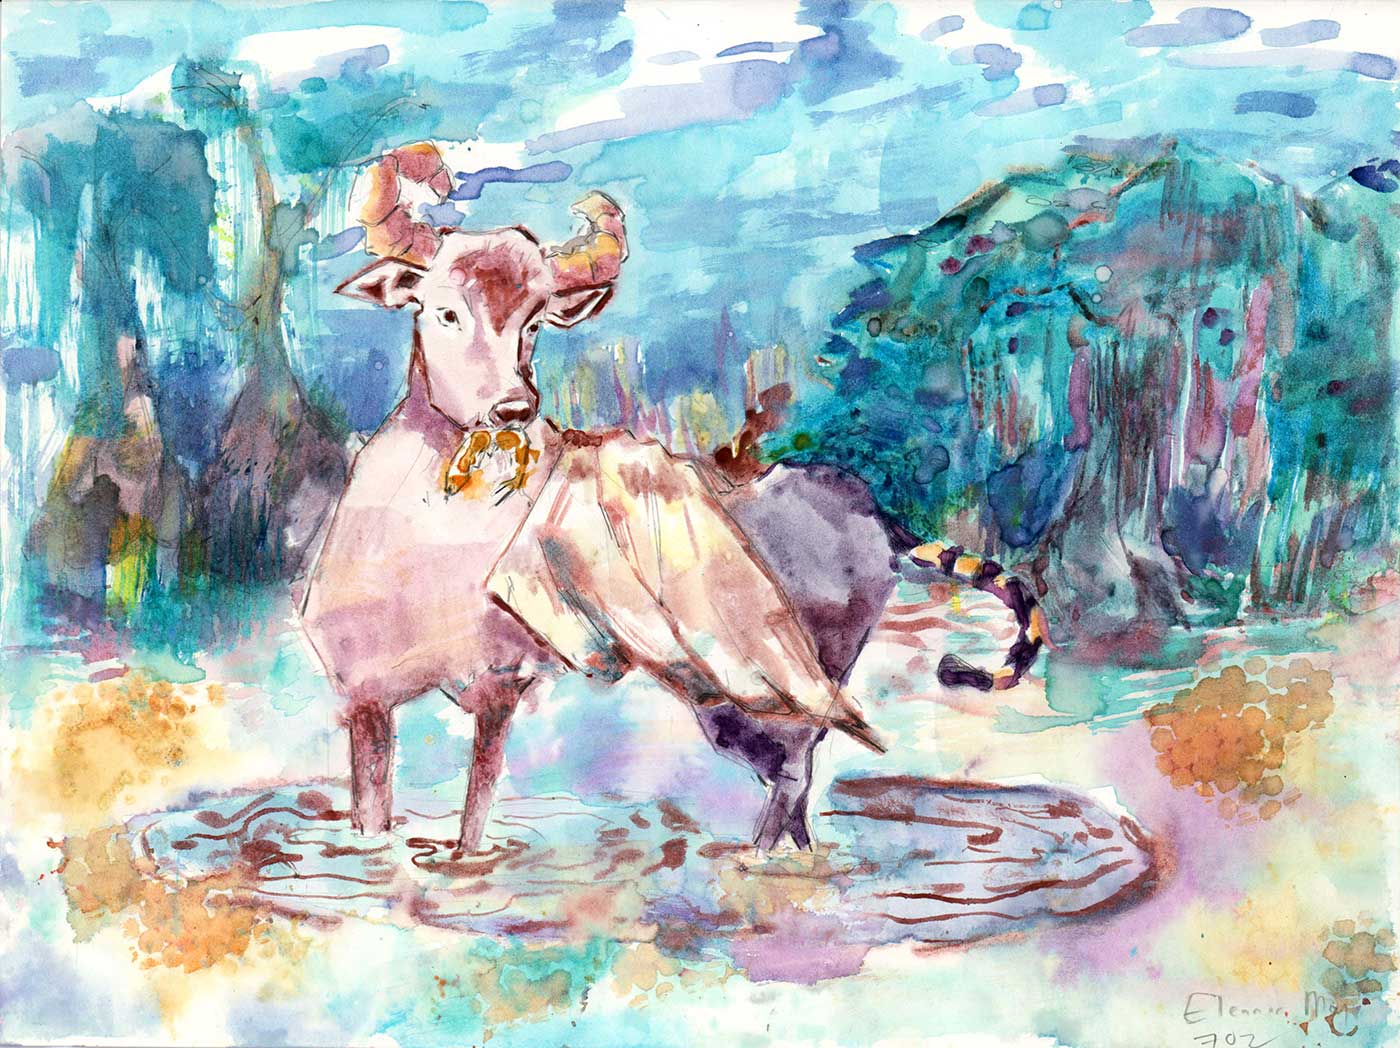 watercolor drawing of a bull-looking creature in a landscape environment.